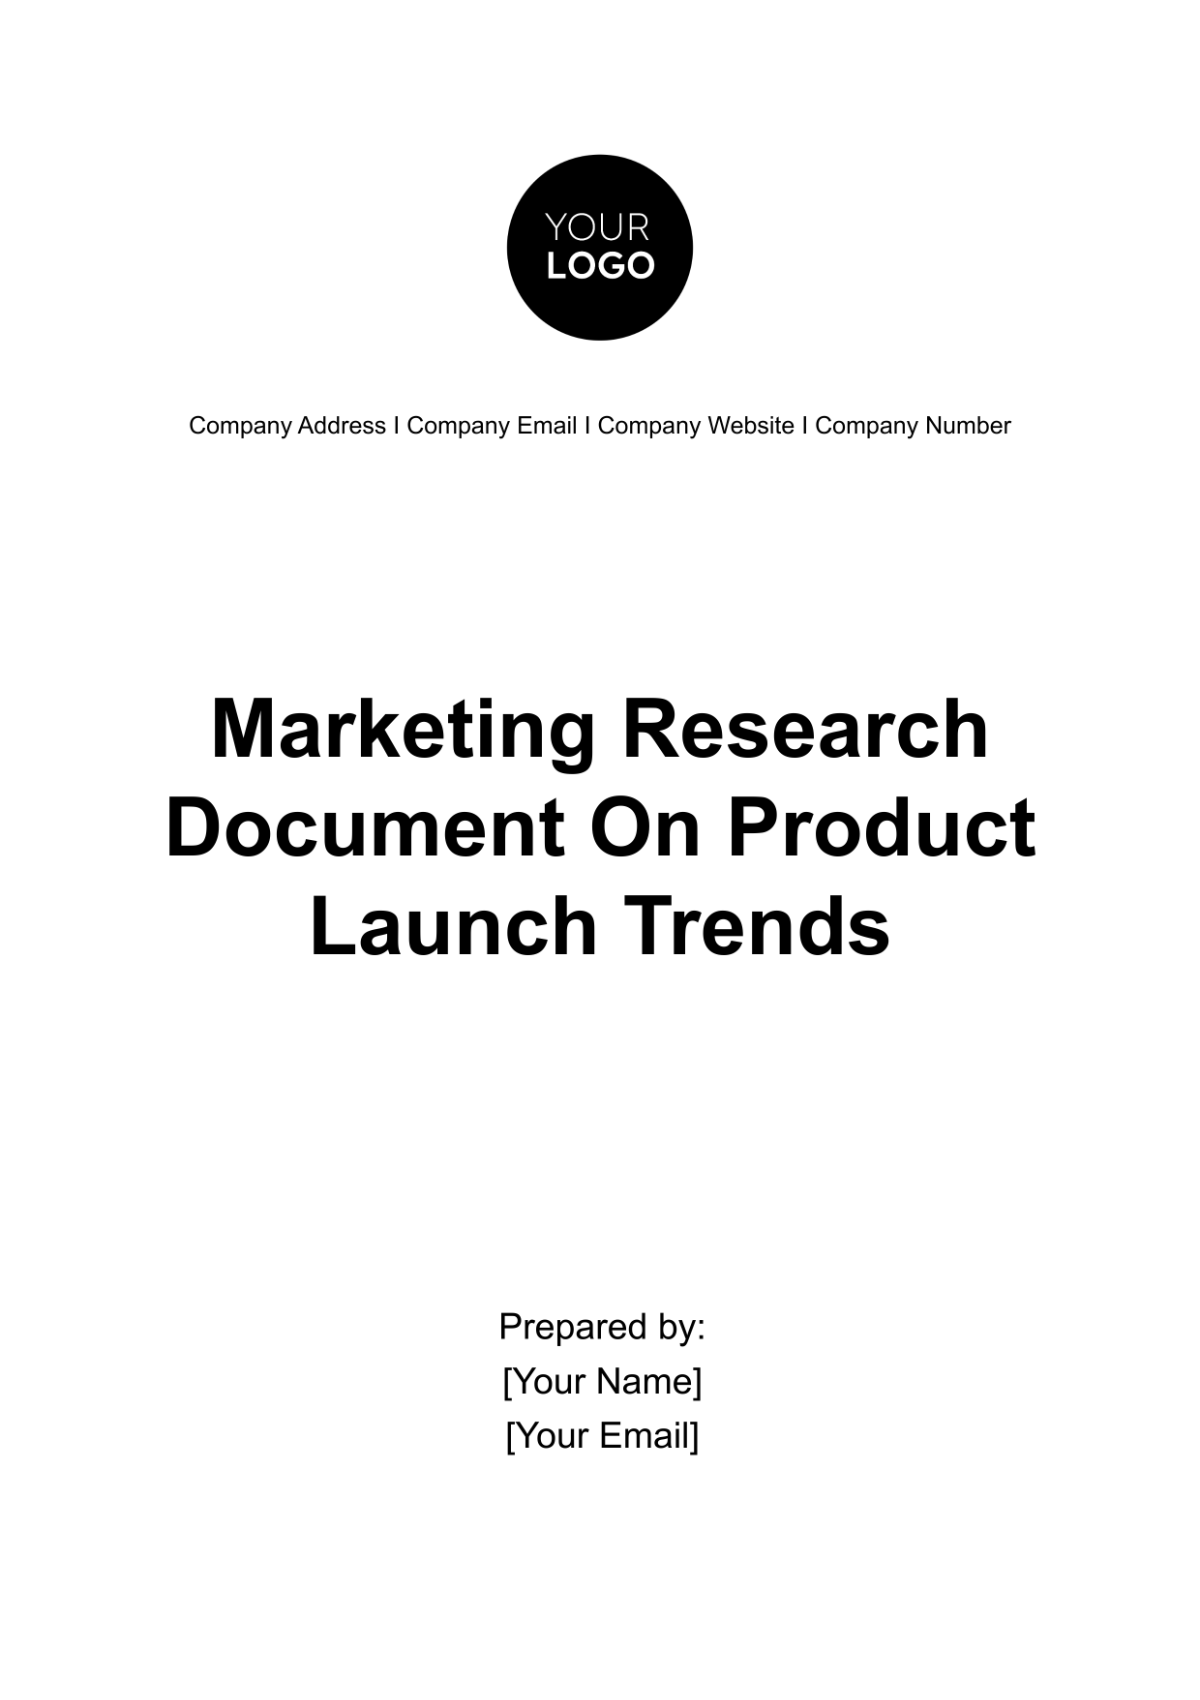 Free Marketing Research Document on Product Launch Trends Template